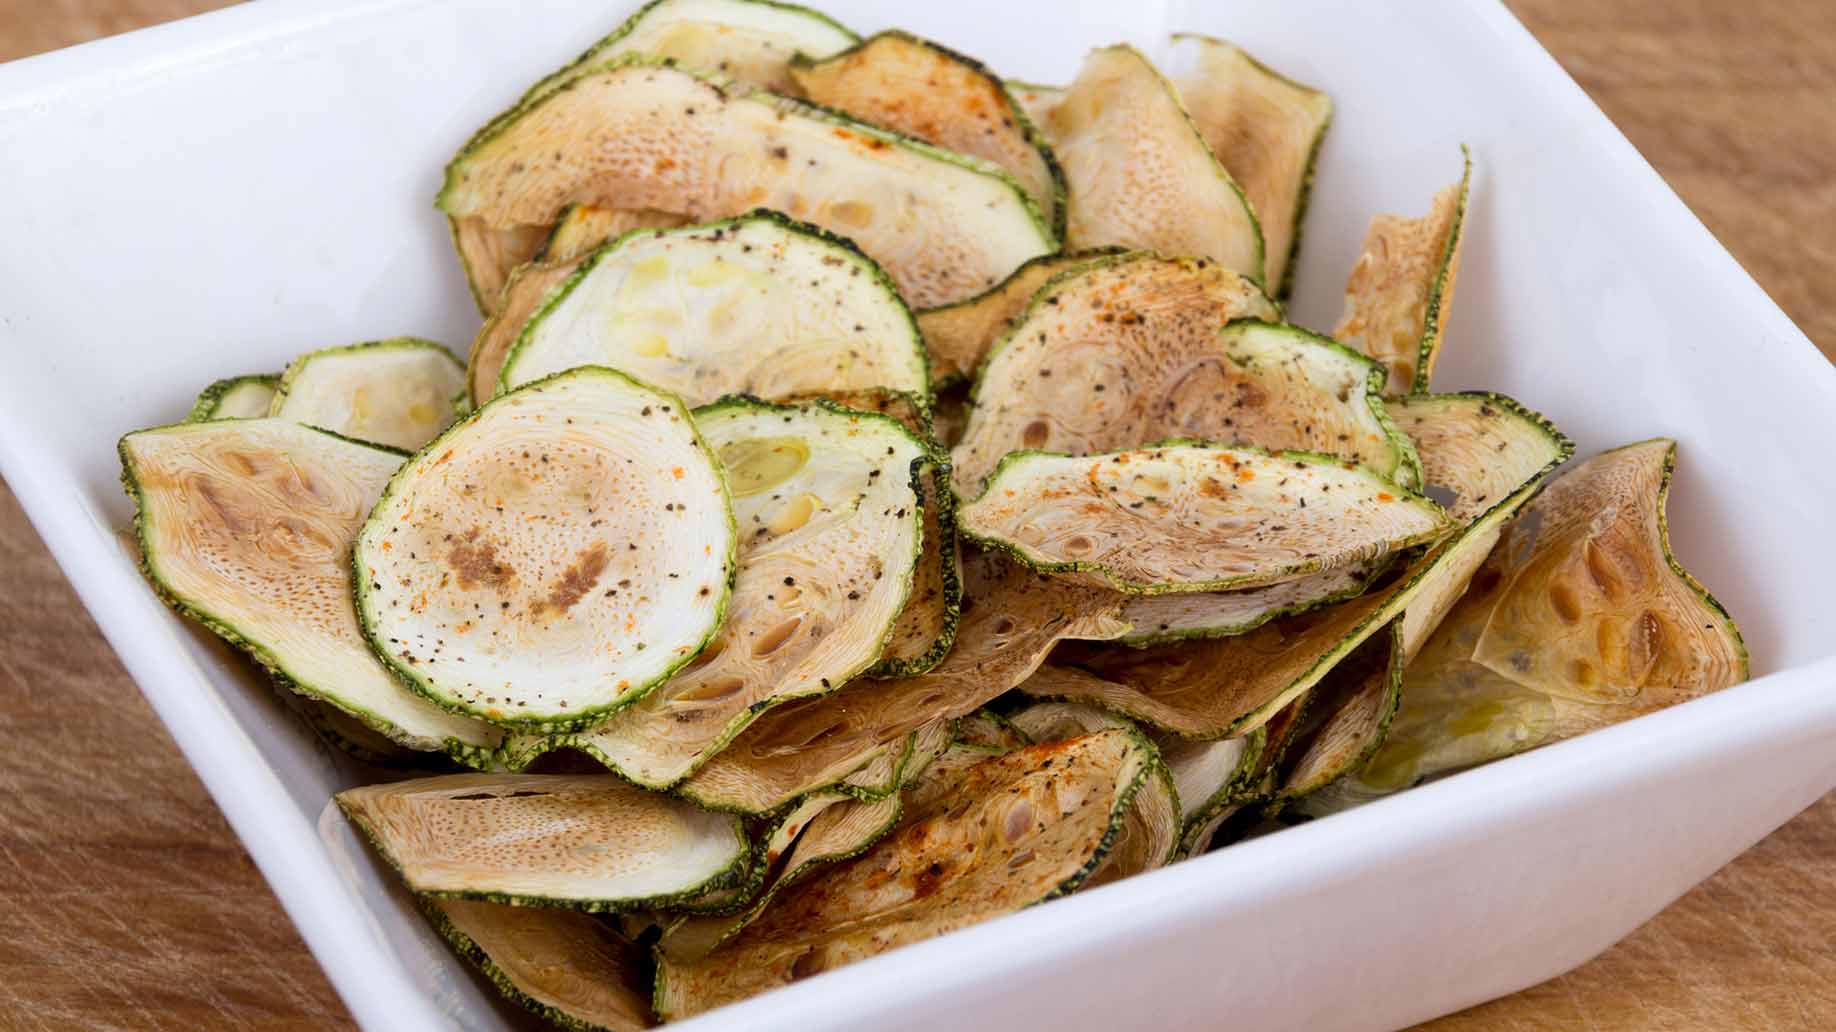 zucchini chips roasted baked natural healthy snack ideas